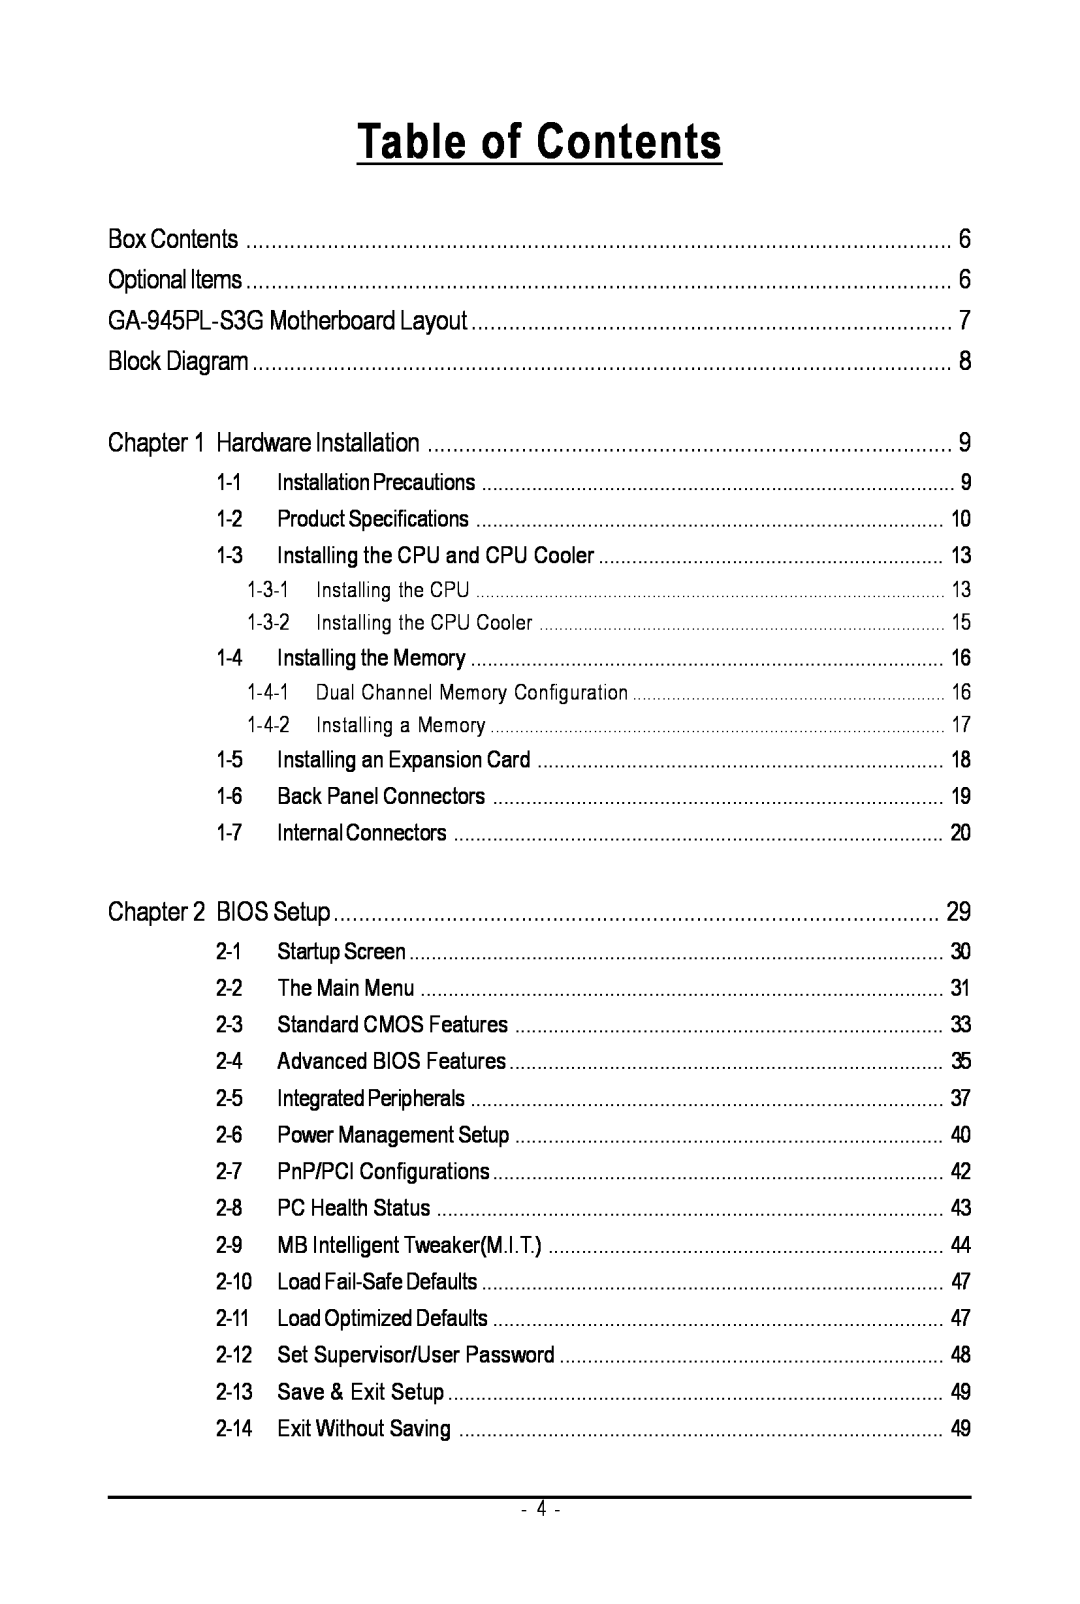 Intel GA-945PL-S3G user manual Table of Contents 